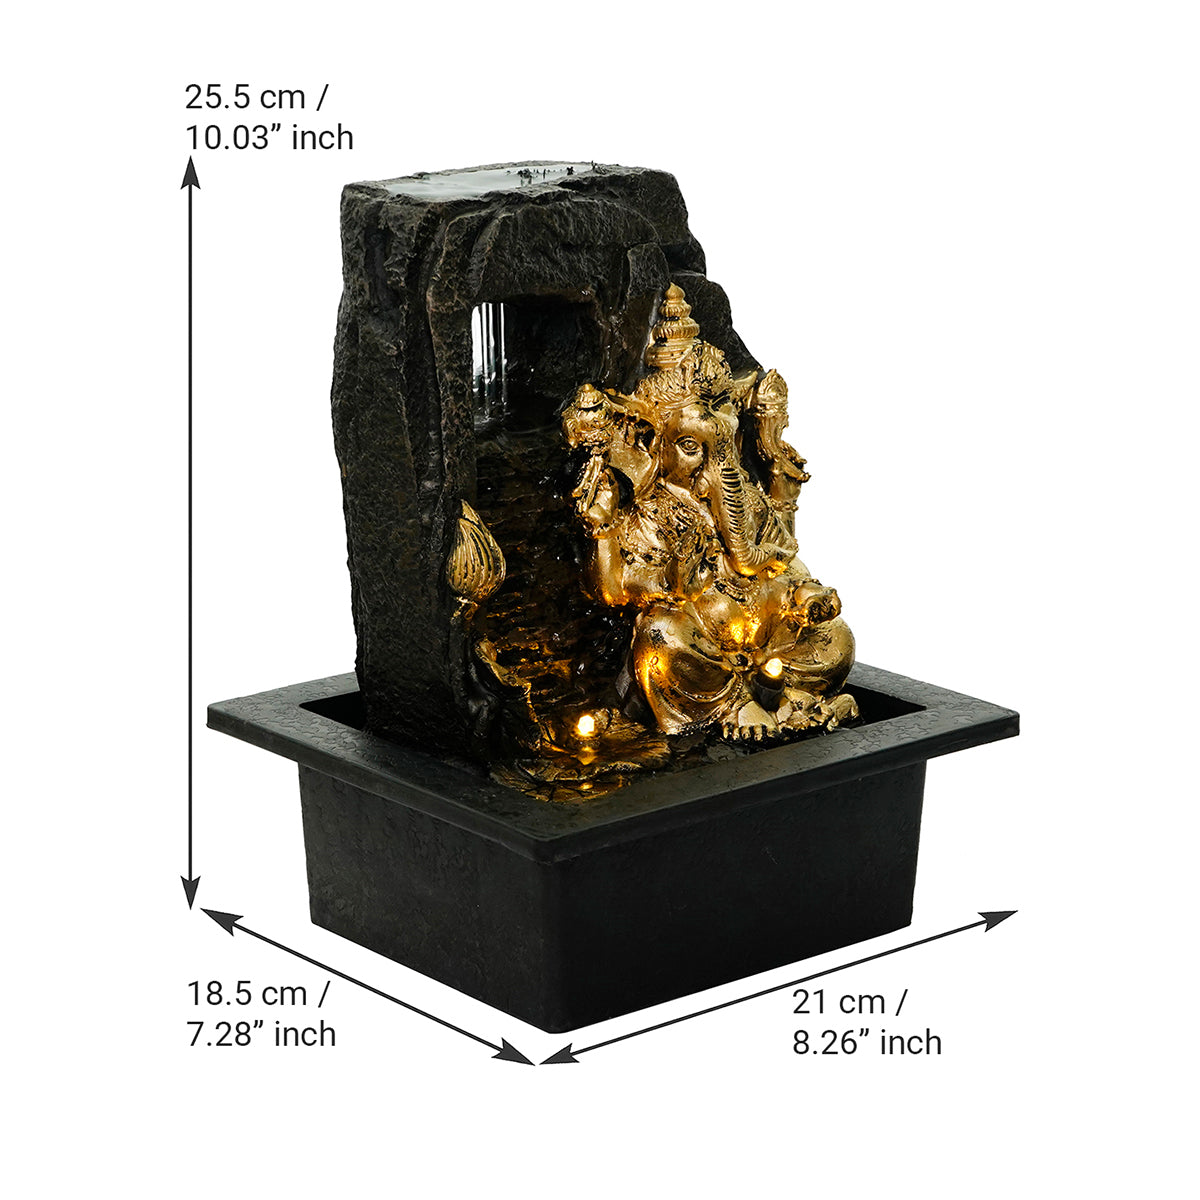 Polystone Black and Golden Lord Ganesha Water Fountain With Light For Home/Office/Indoor Decor 2